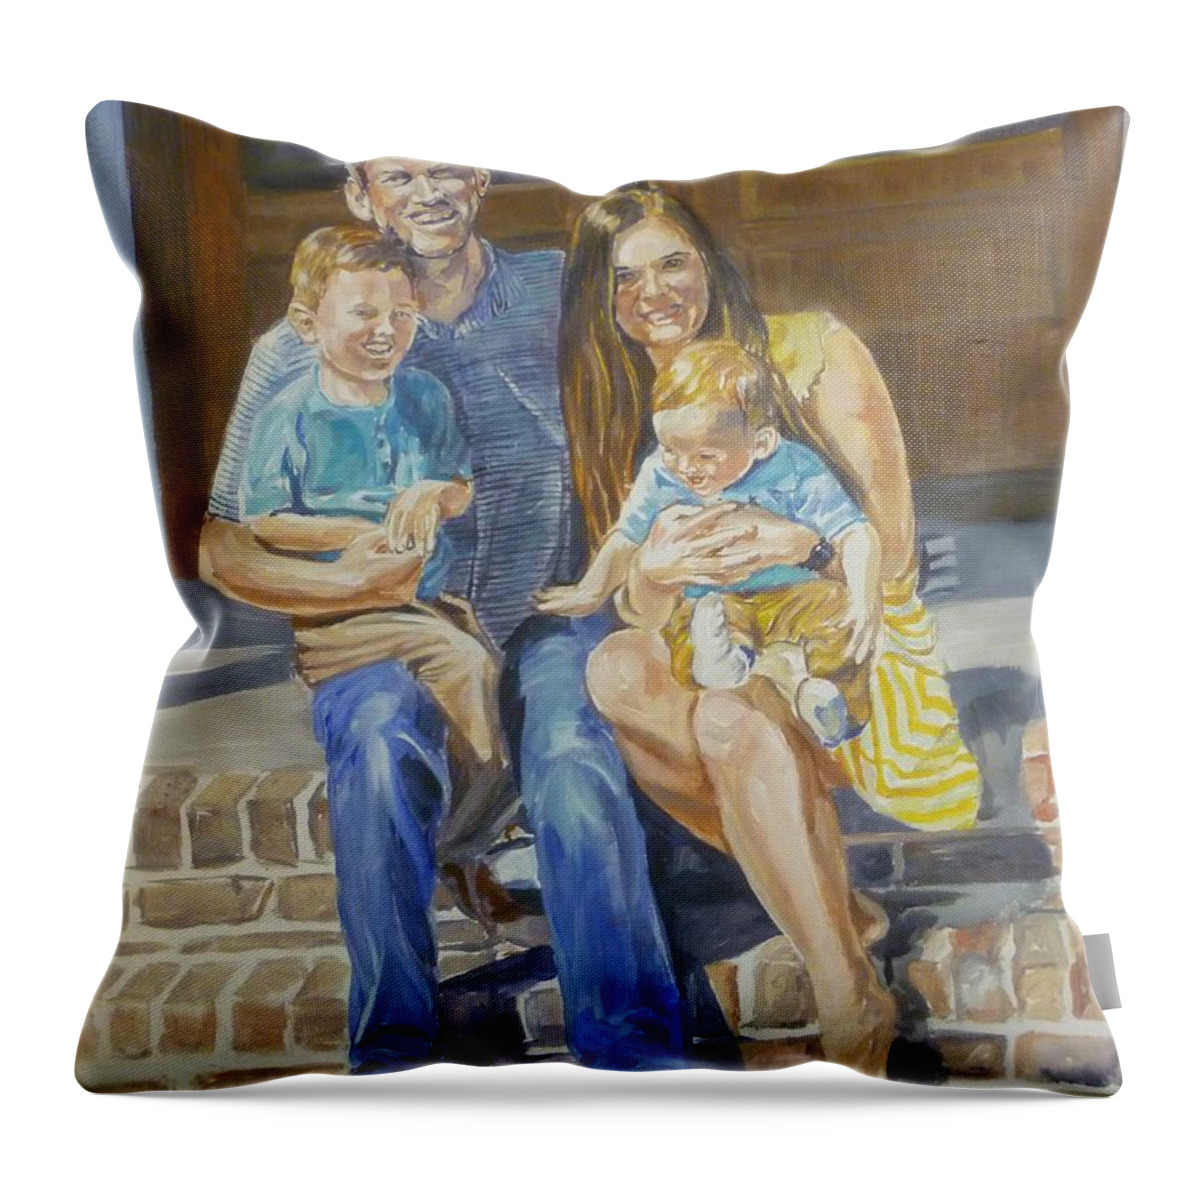 Home Throw Pillow featuring the painting A New Home by Bryan Bustard